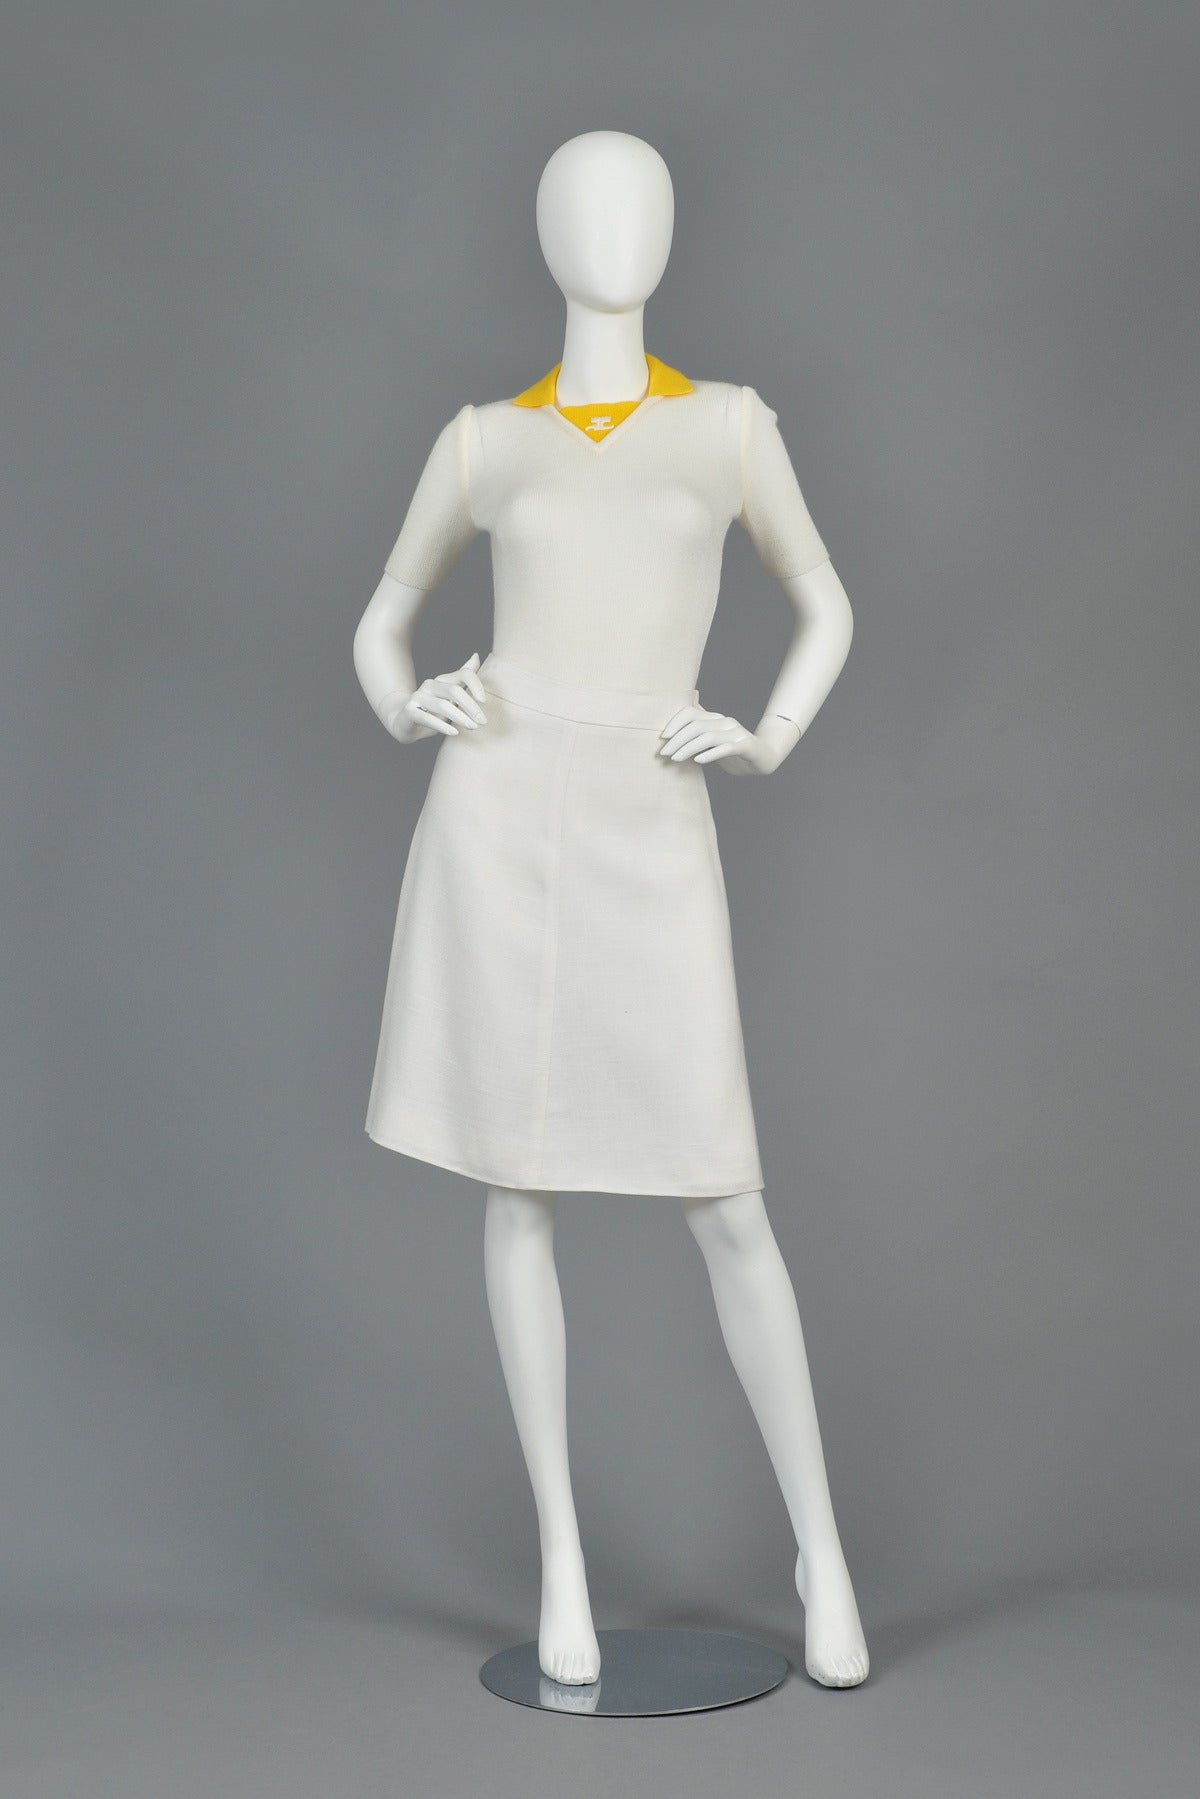 Versatile vintage 1960s/70s Courrèges skirt. Simple white feminine skirt. Perfect for Spring cocktails or a quick game of tennis. Linen textured rayon. Fully labeled with Courrèges + Bonwit Teller labels. Excellent condition.